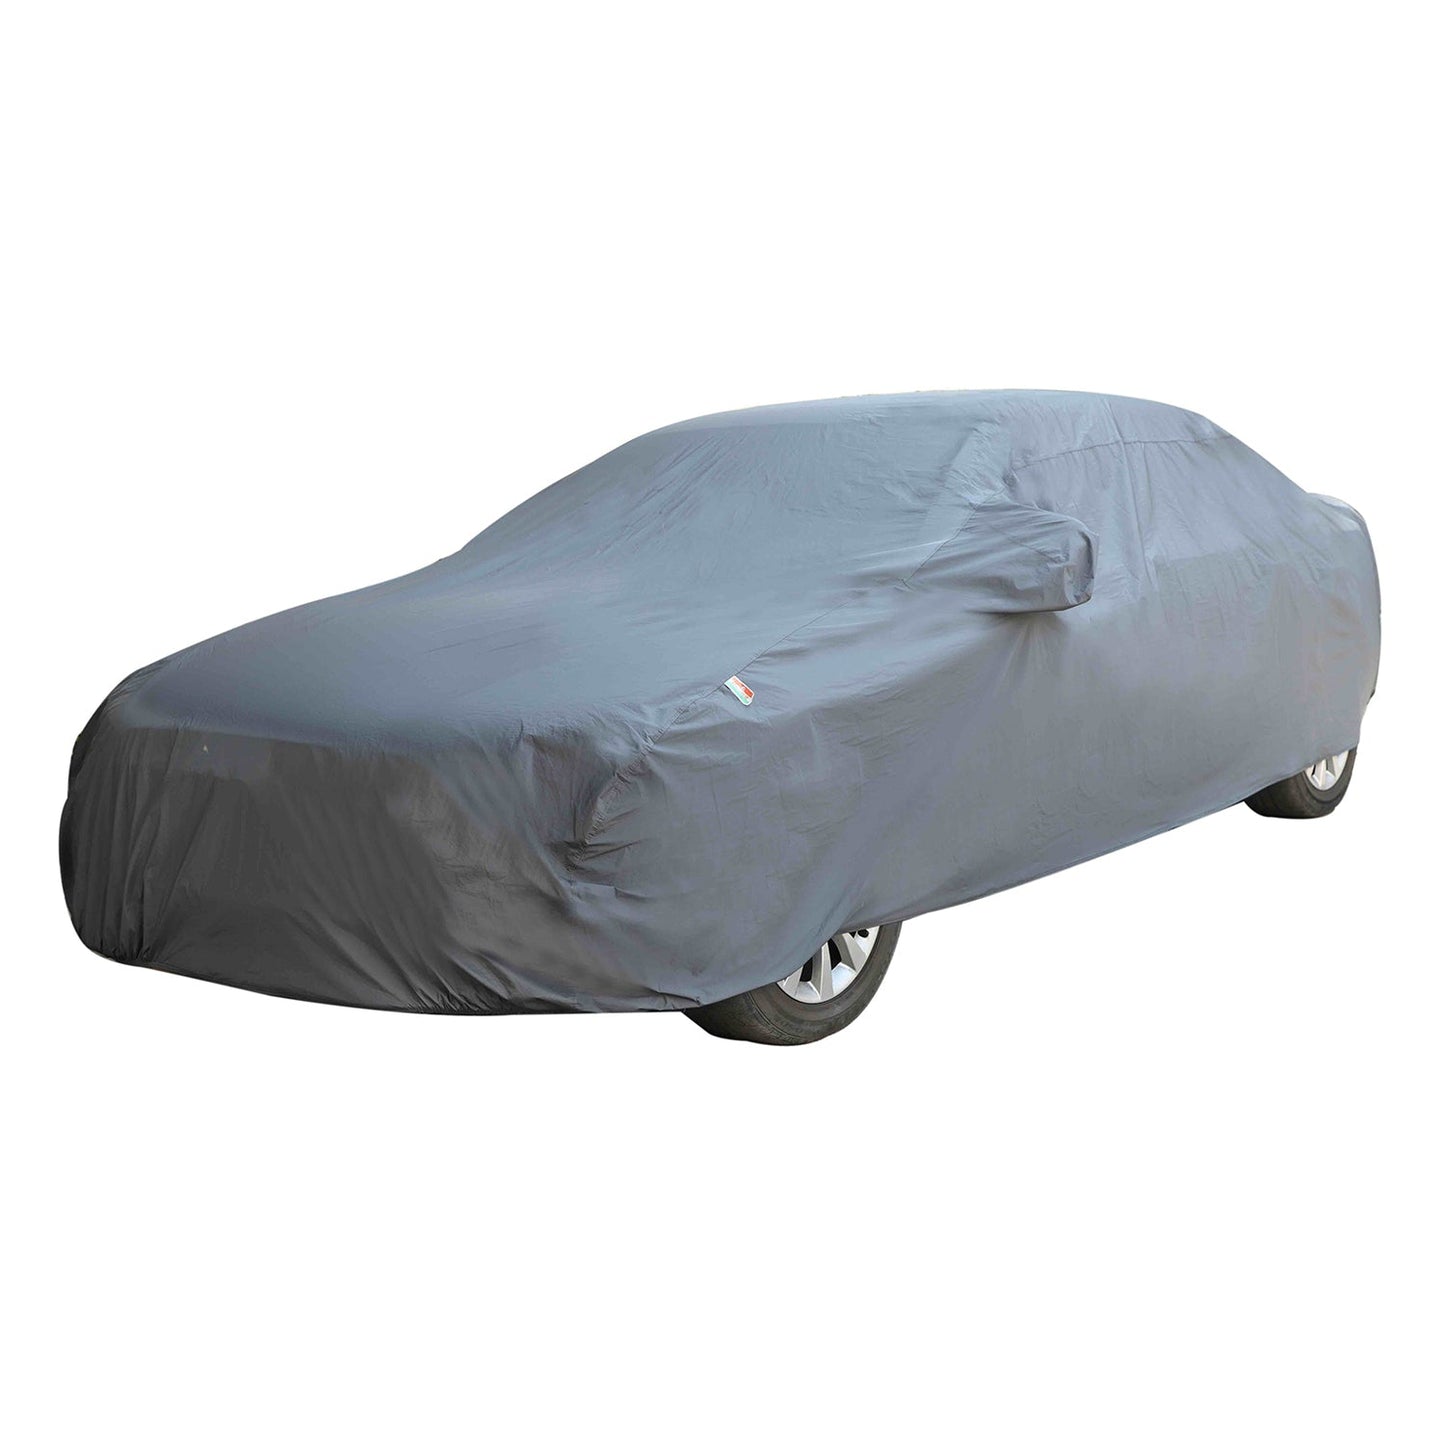 Oshotto Dark Grey 100% Anti Reflective, dustproof and Water Proof Car Body Cover with Mirror Pockets For Volvo XC40/V40